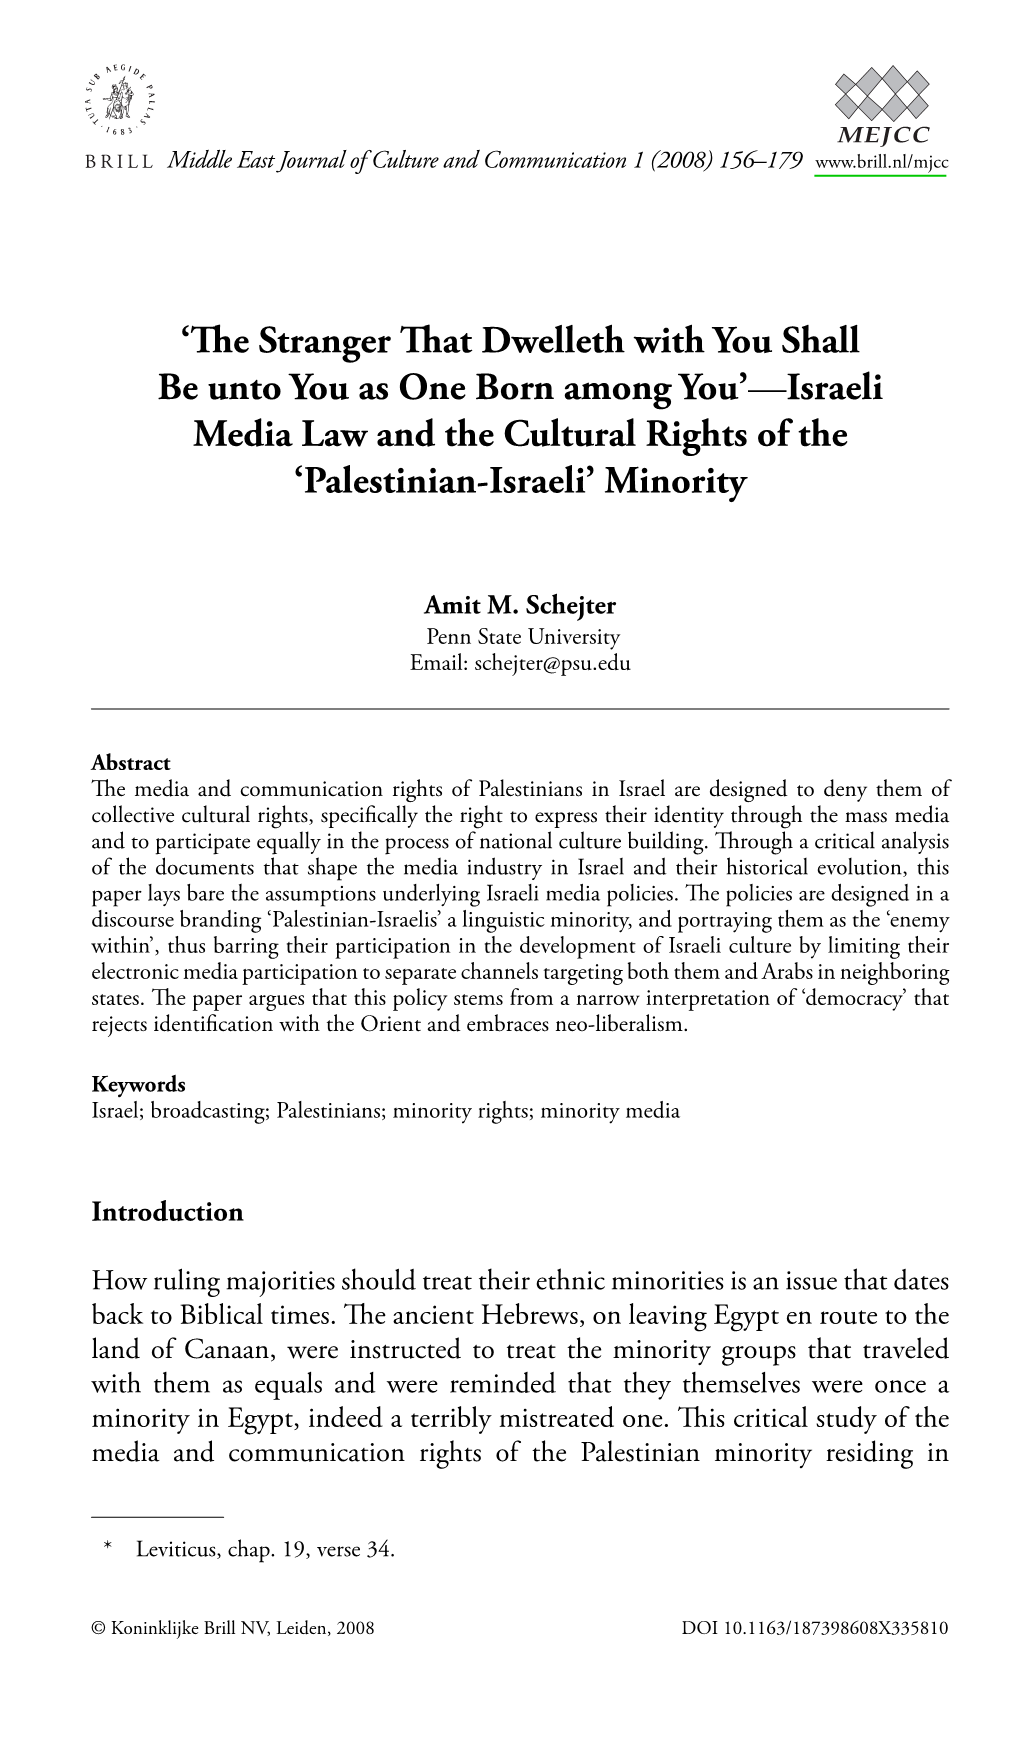 Israeli Media Law and the Cultural Rights of the ‘Palestinian-Israeli’ Minority